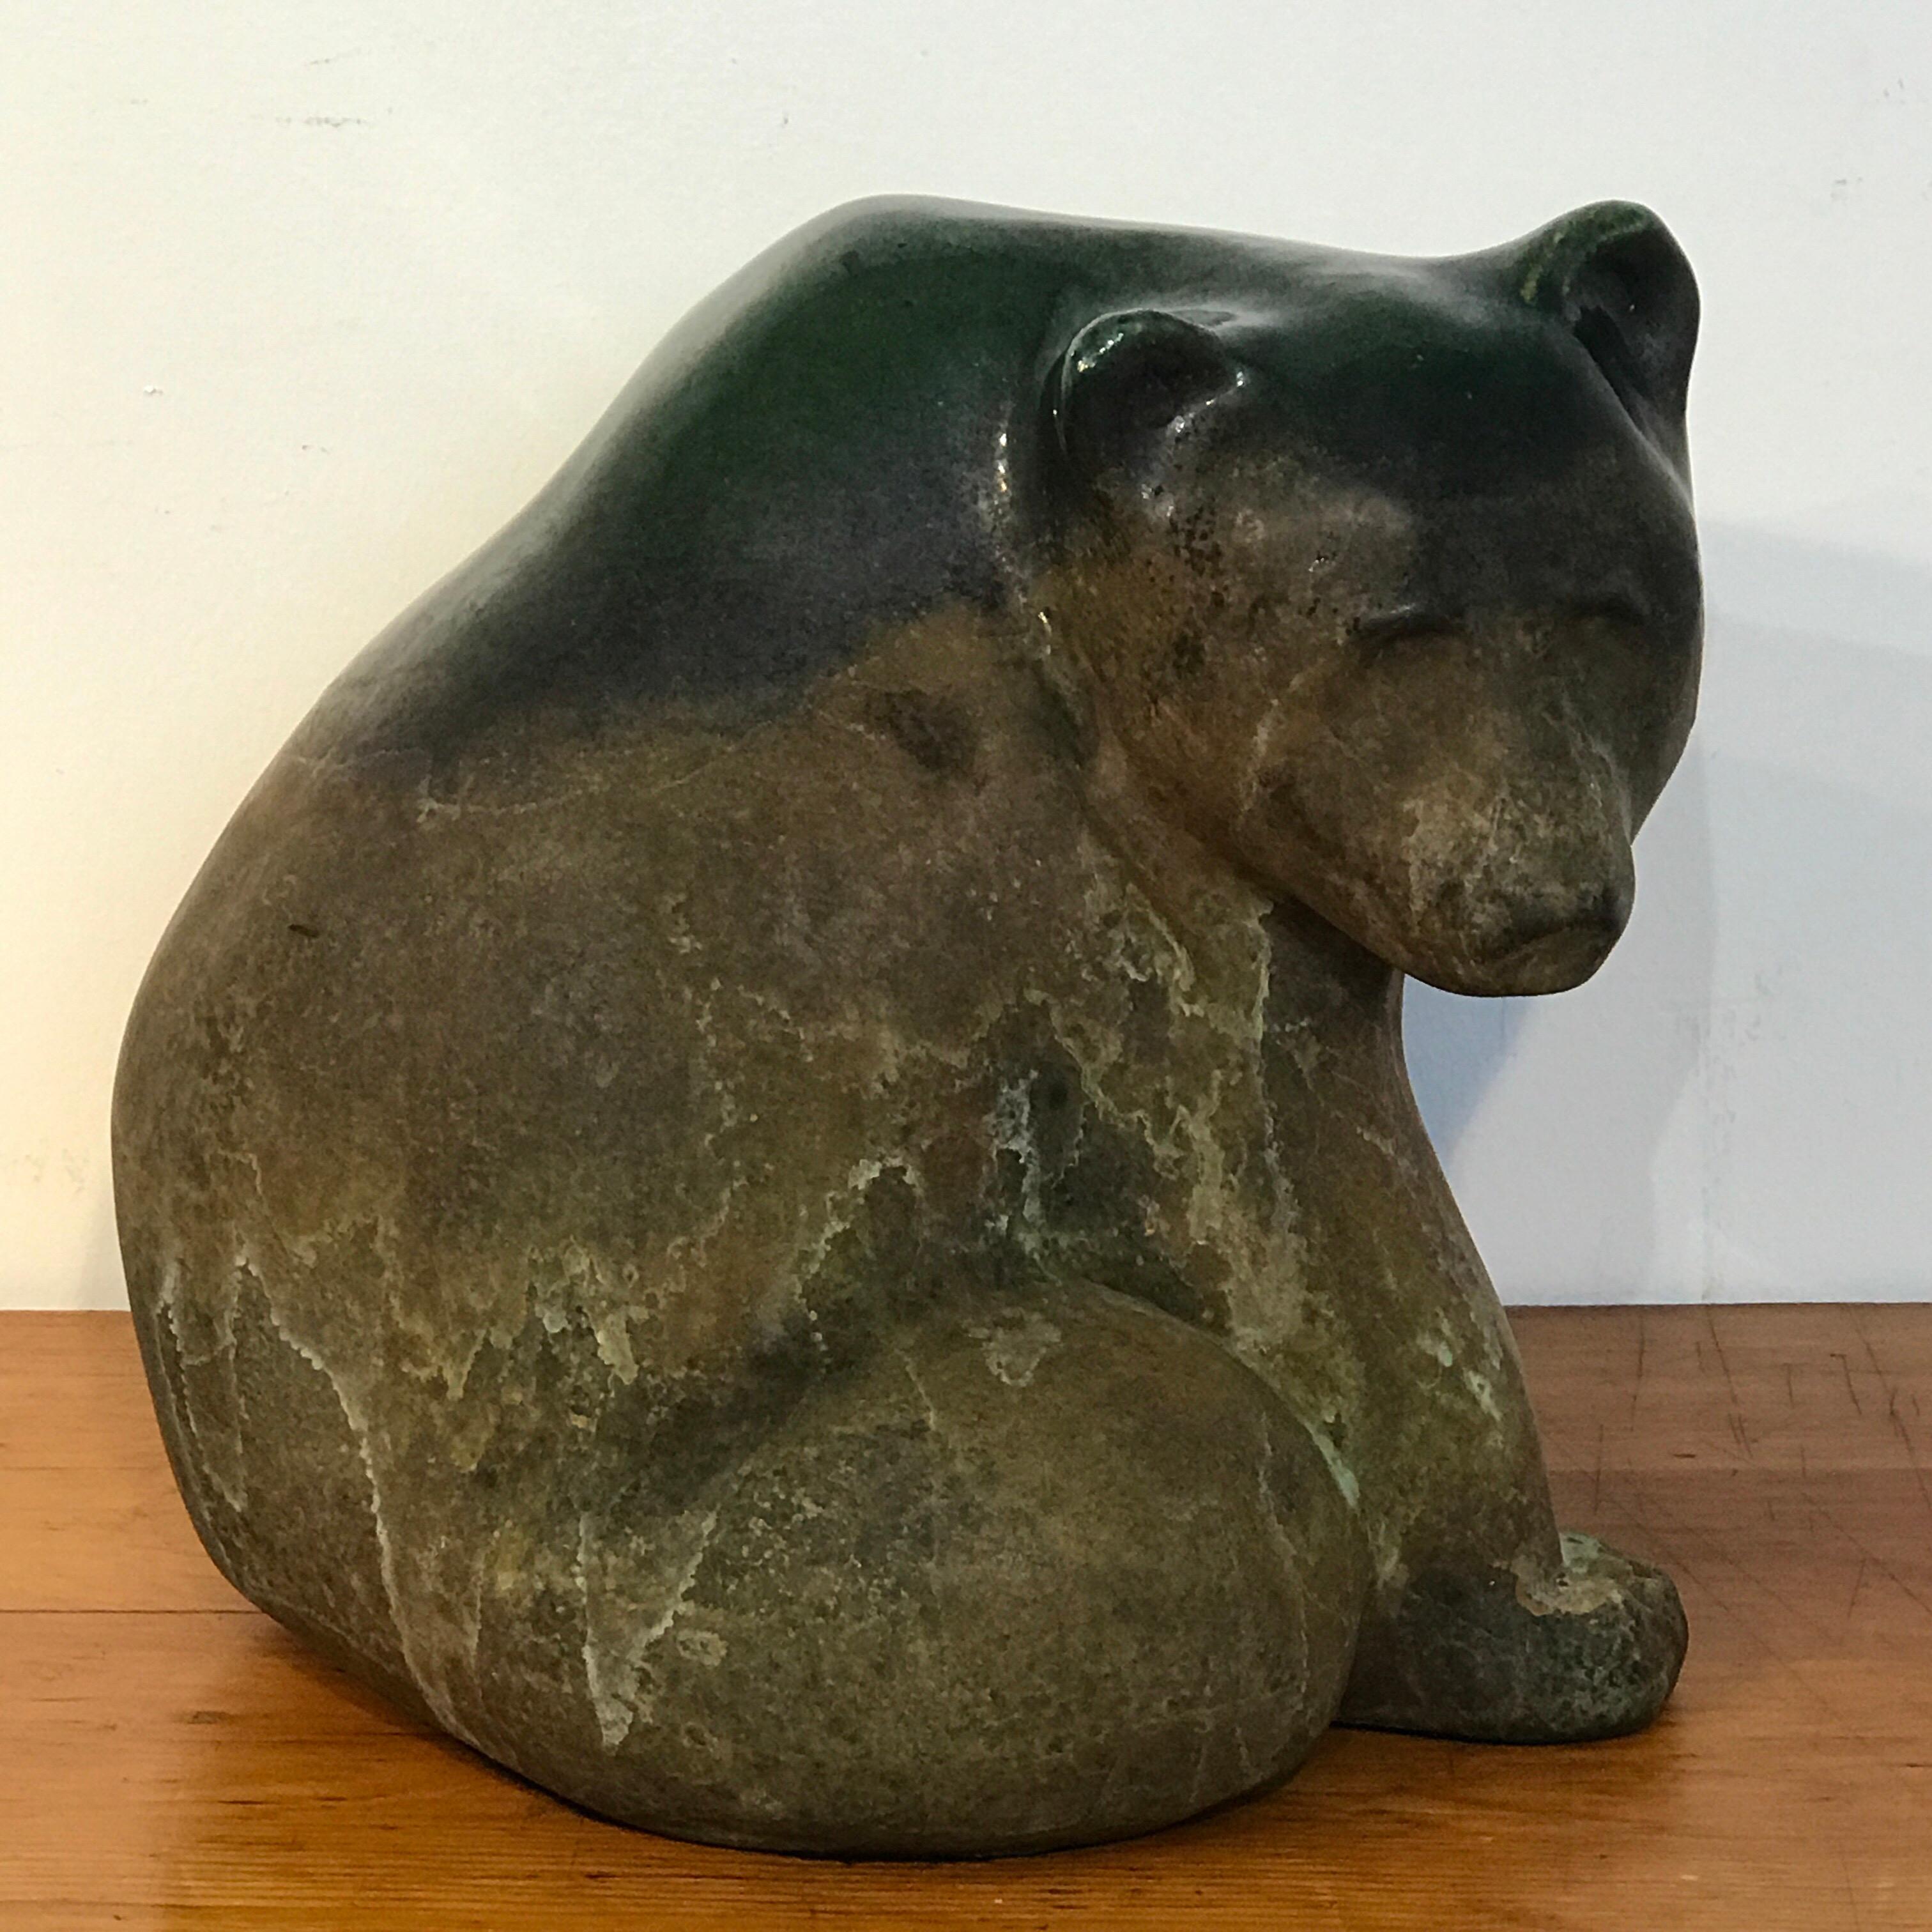 Large Raku pottery seated bear by Tony Evans, exceptional colors and glaze techniques.